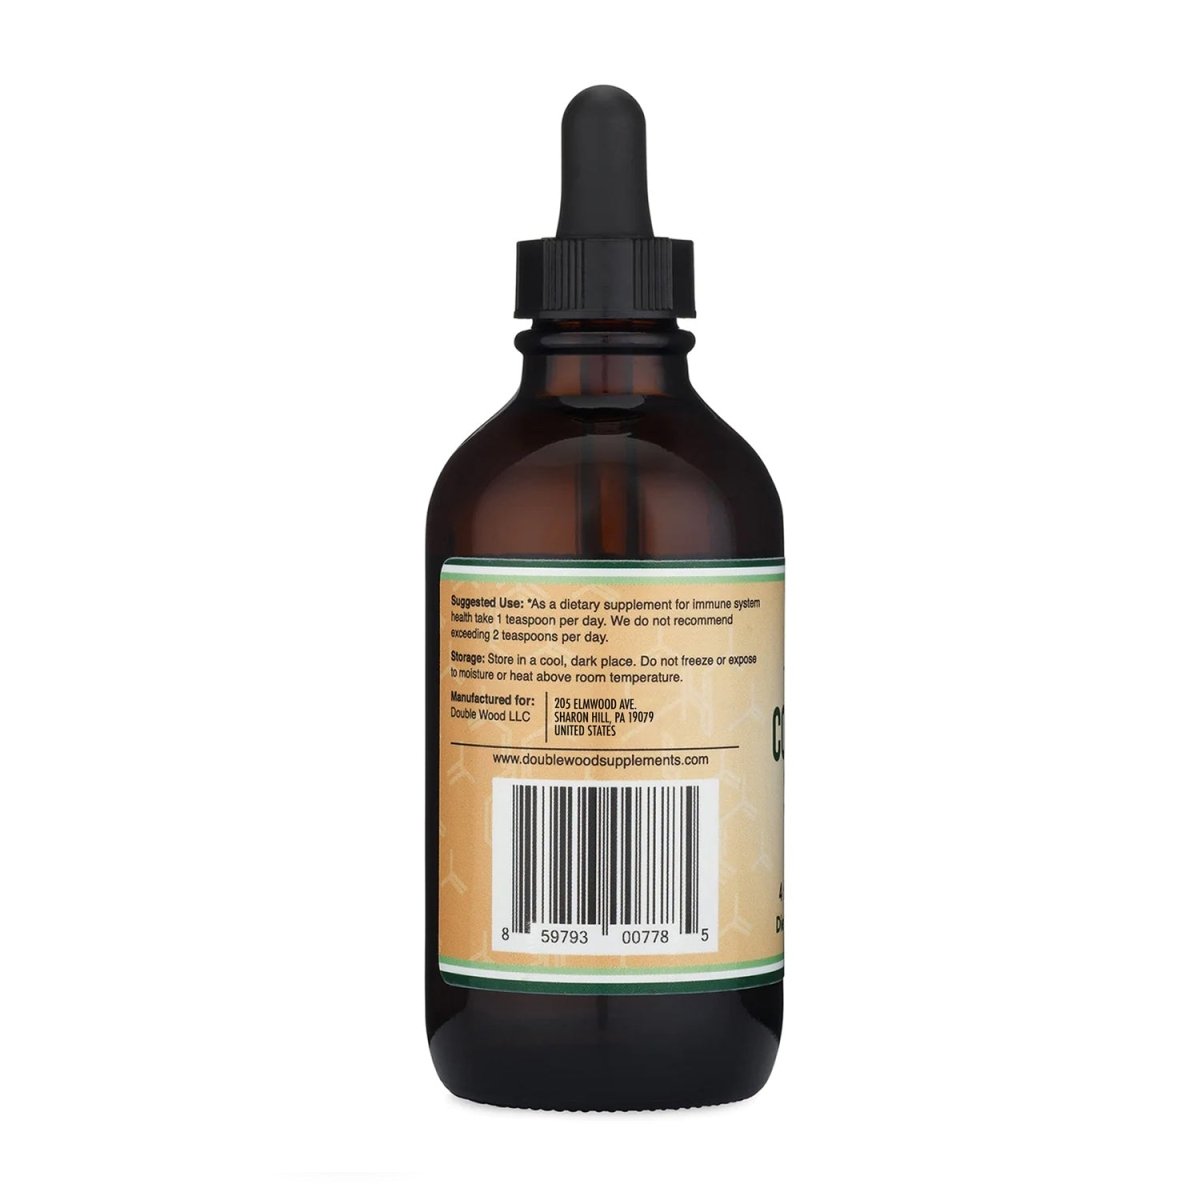 Colloidal Silver Double Pack - Double Wood Supplements